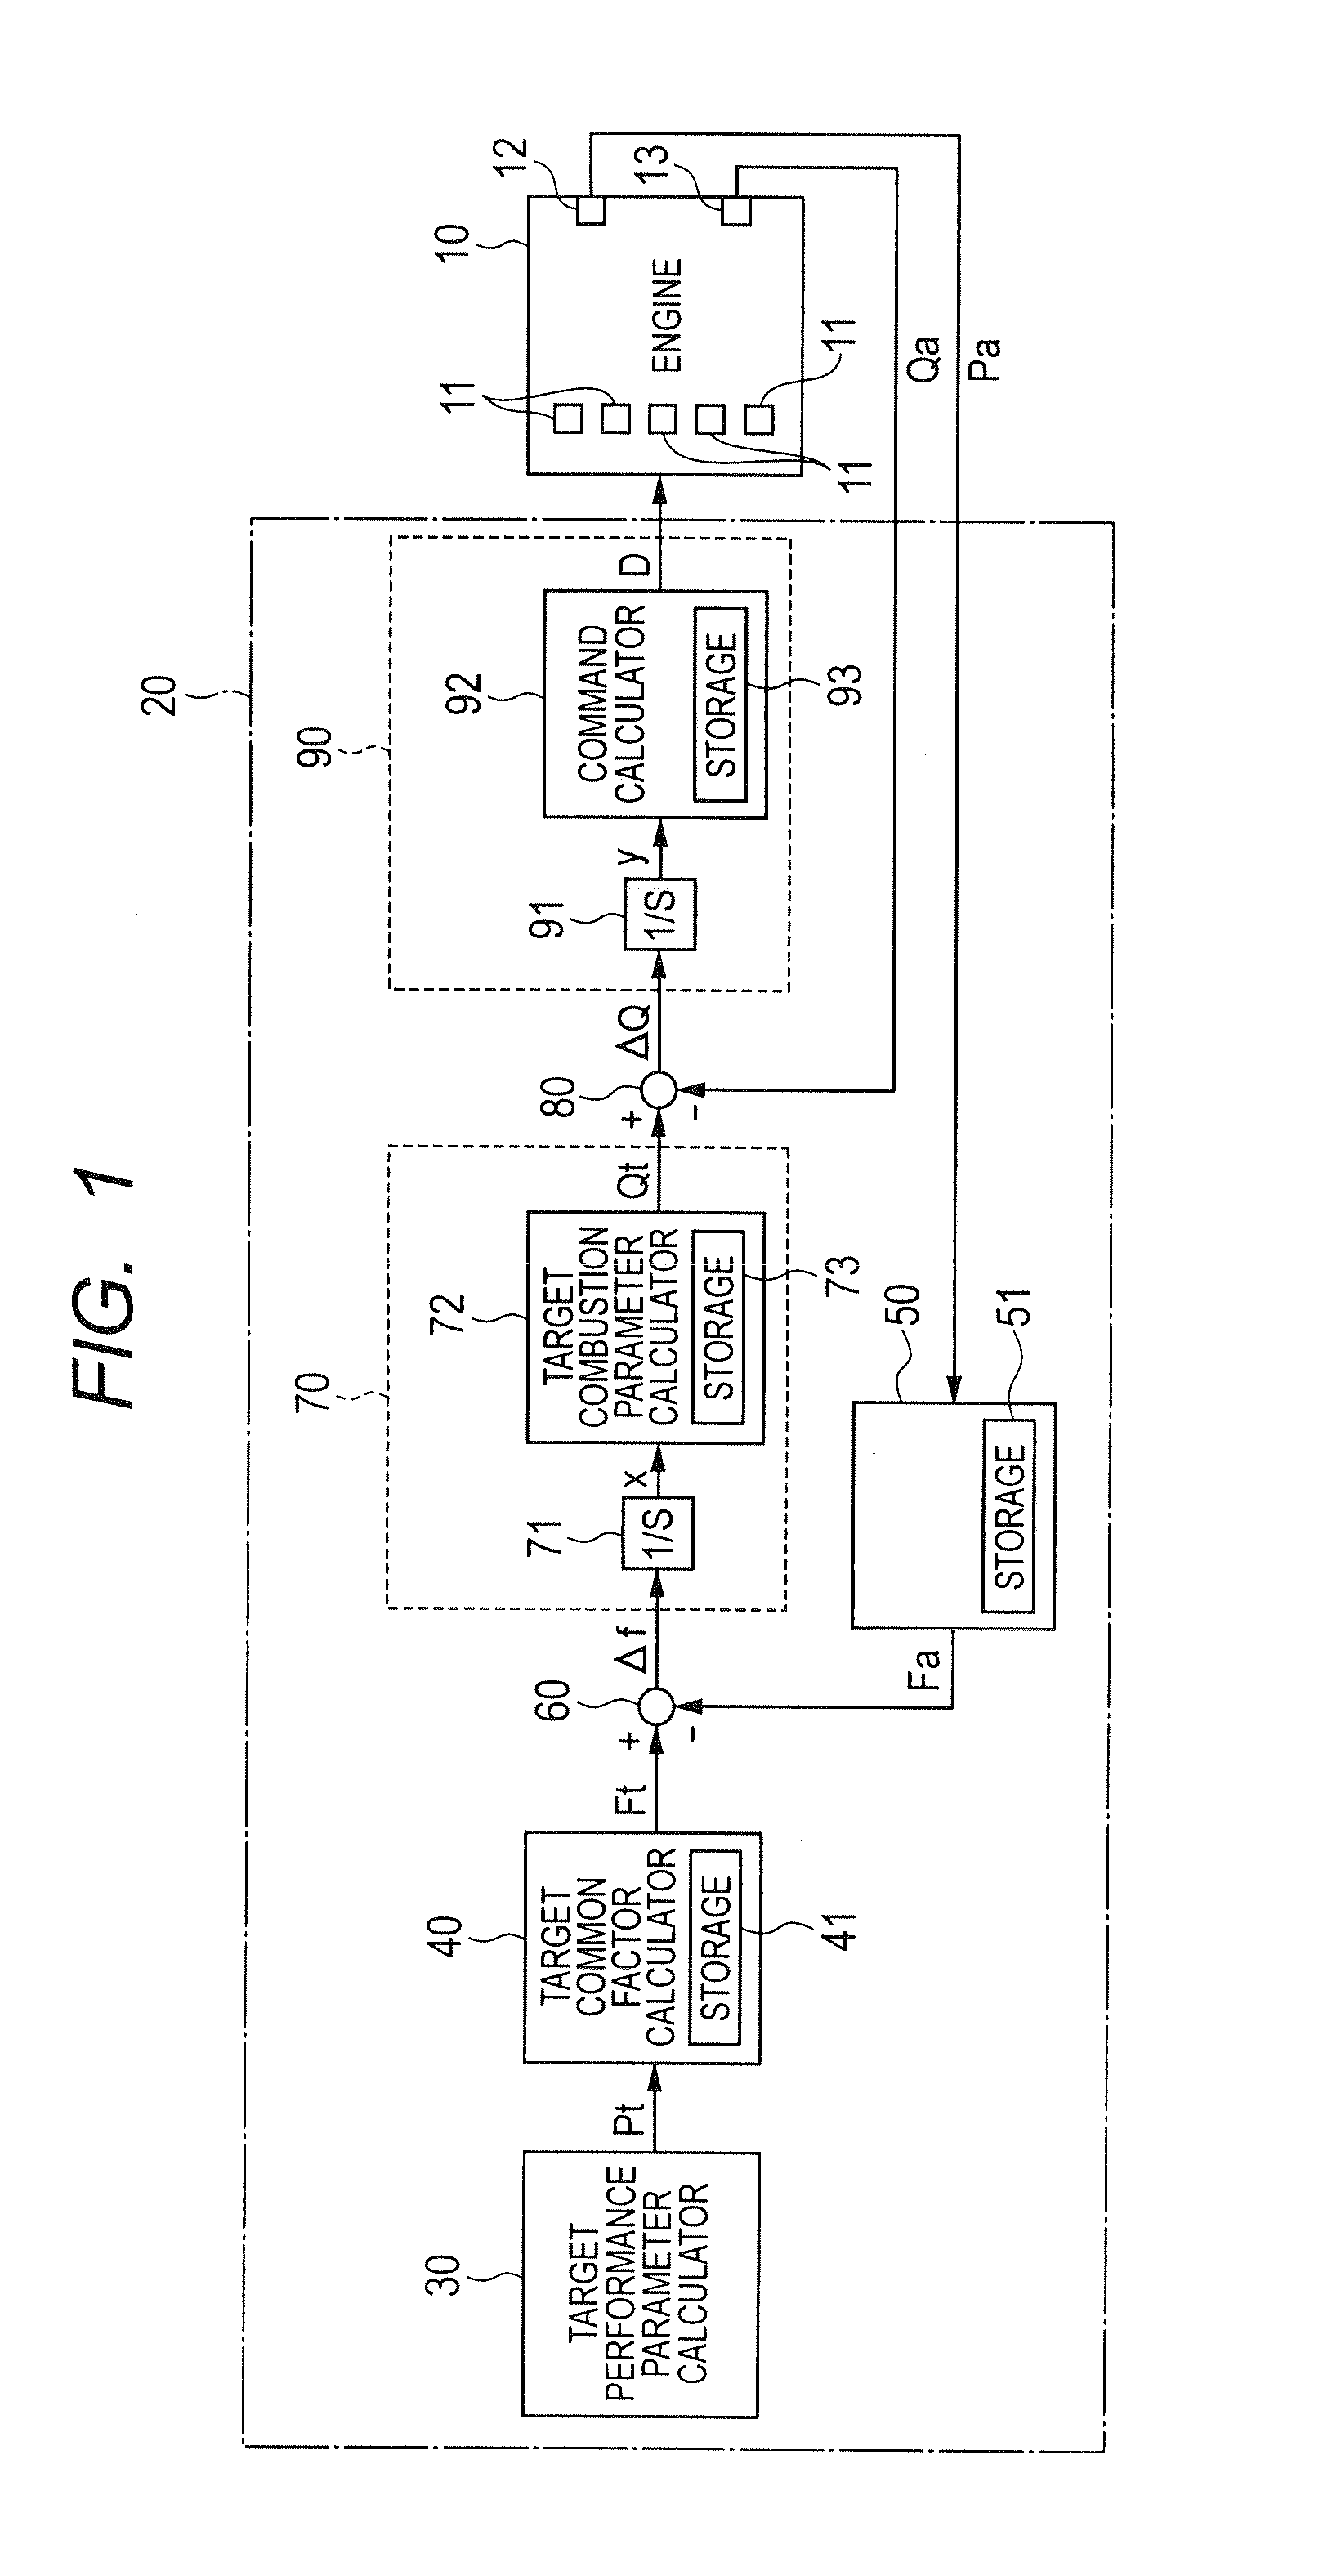 Engine control system for actuator control